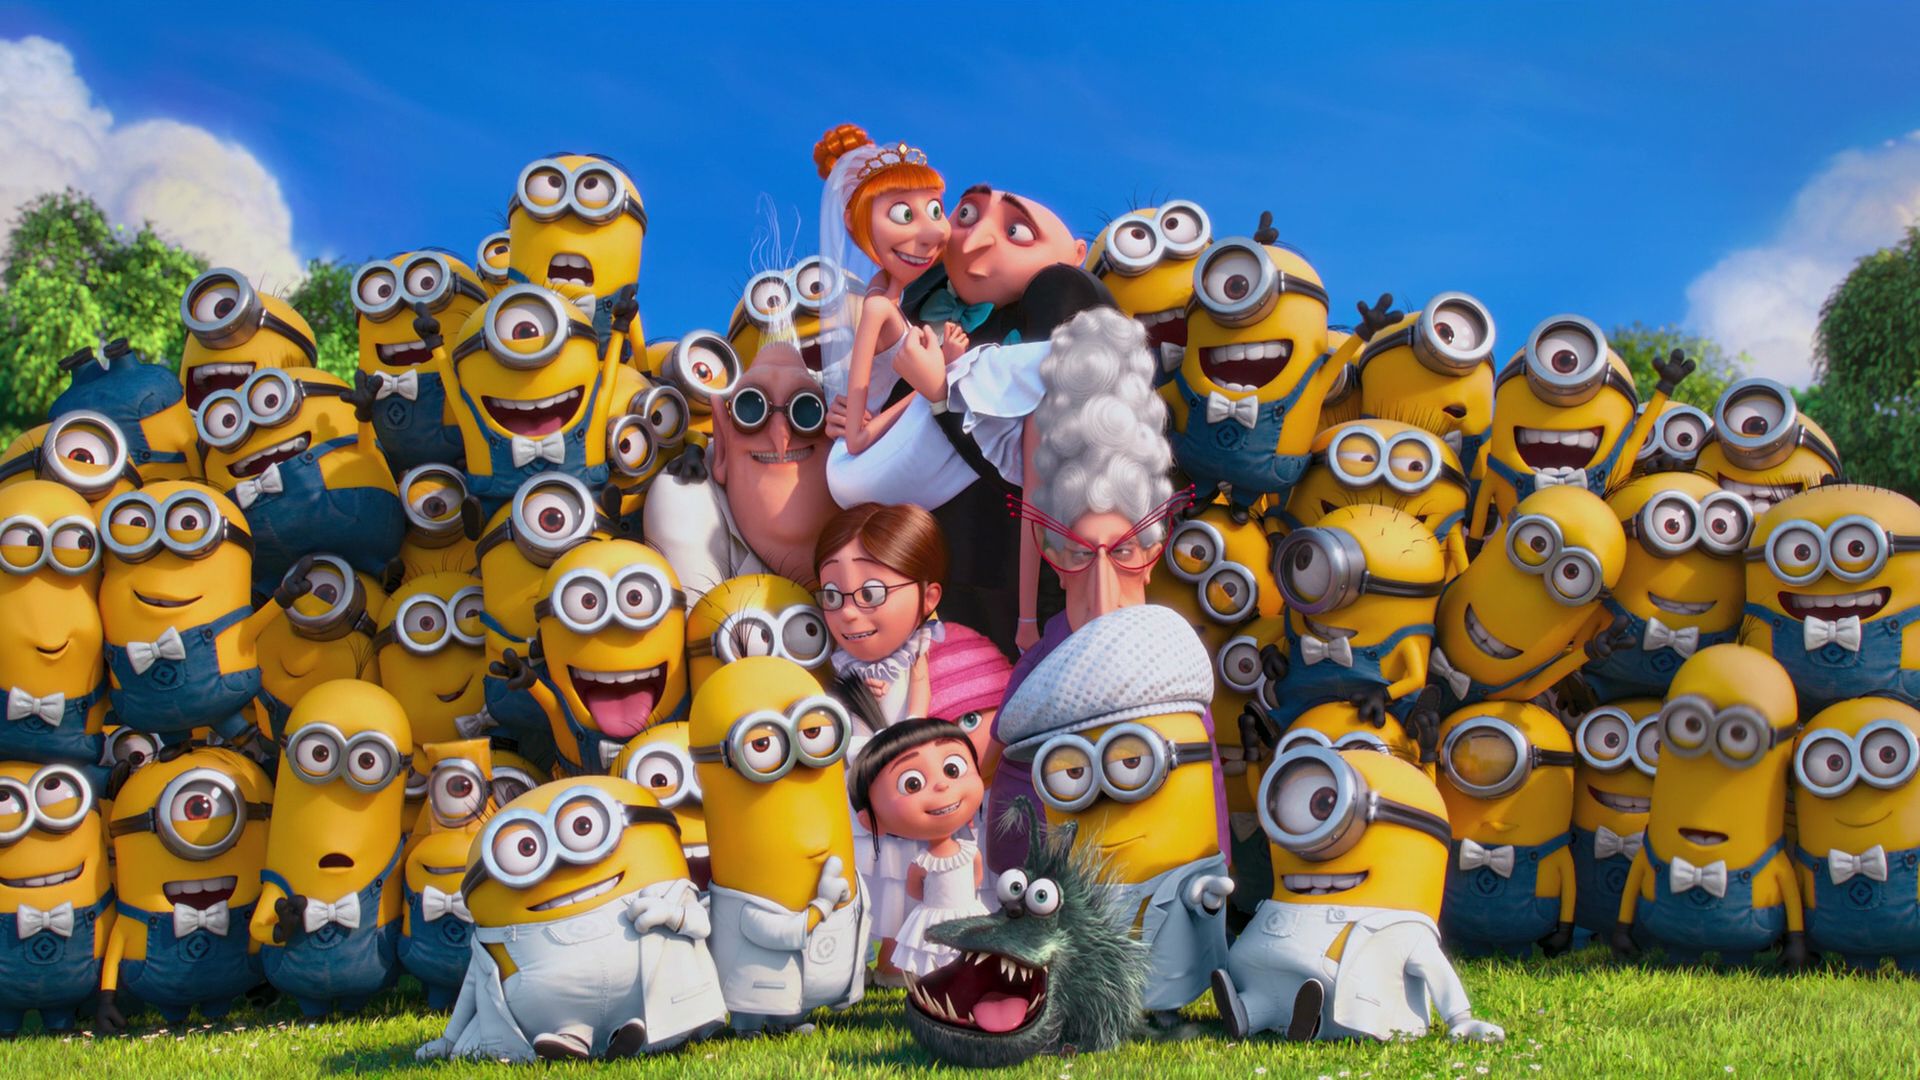 8k Margo (Despicable Me) Images